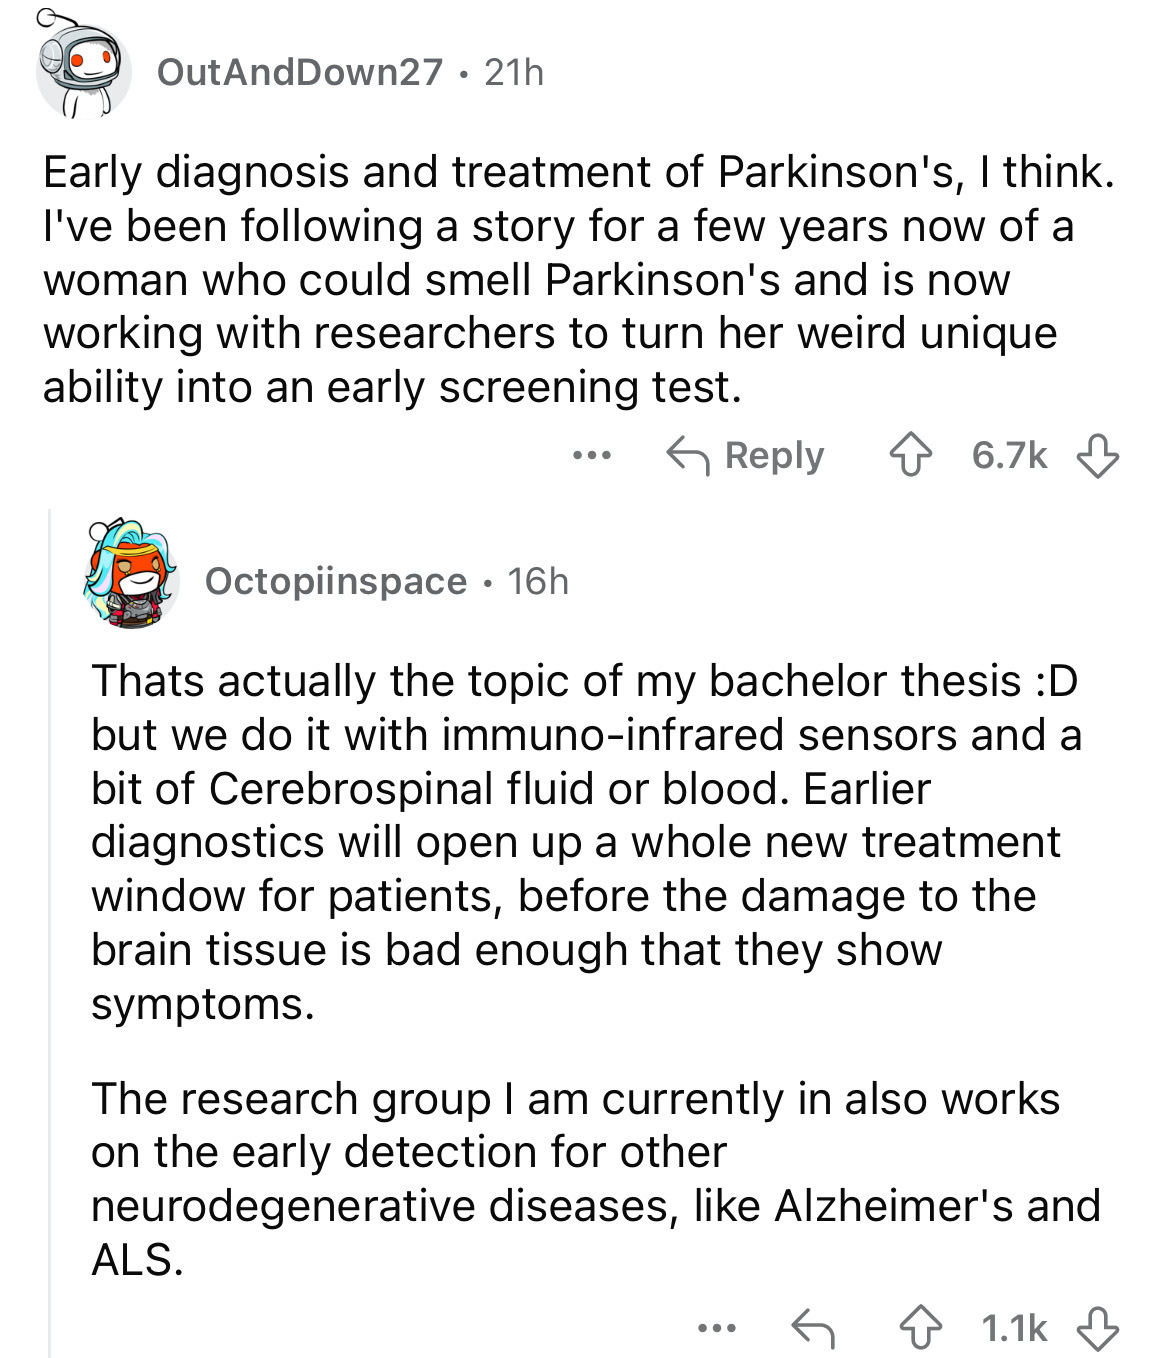 document - OutAndDown27 21h Early diagnosis and treatment of Parkinson's, I think. I've been ing a story for a few years now of a woman who could smell Parkinson's and is now working with researchers to turn her weird unique ability into an early screenin